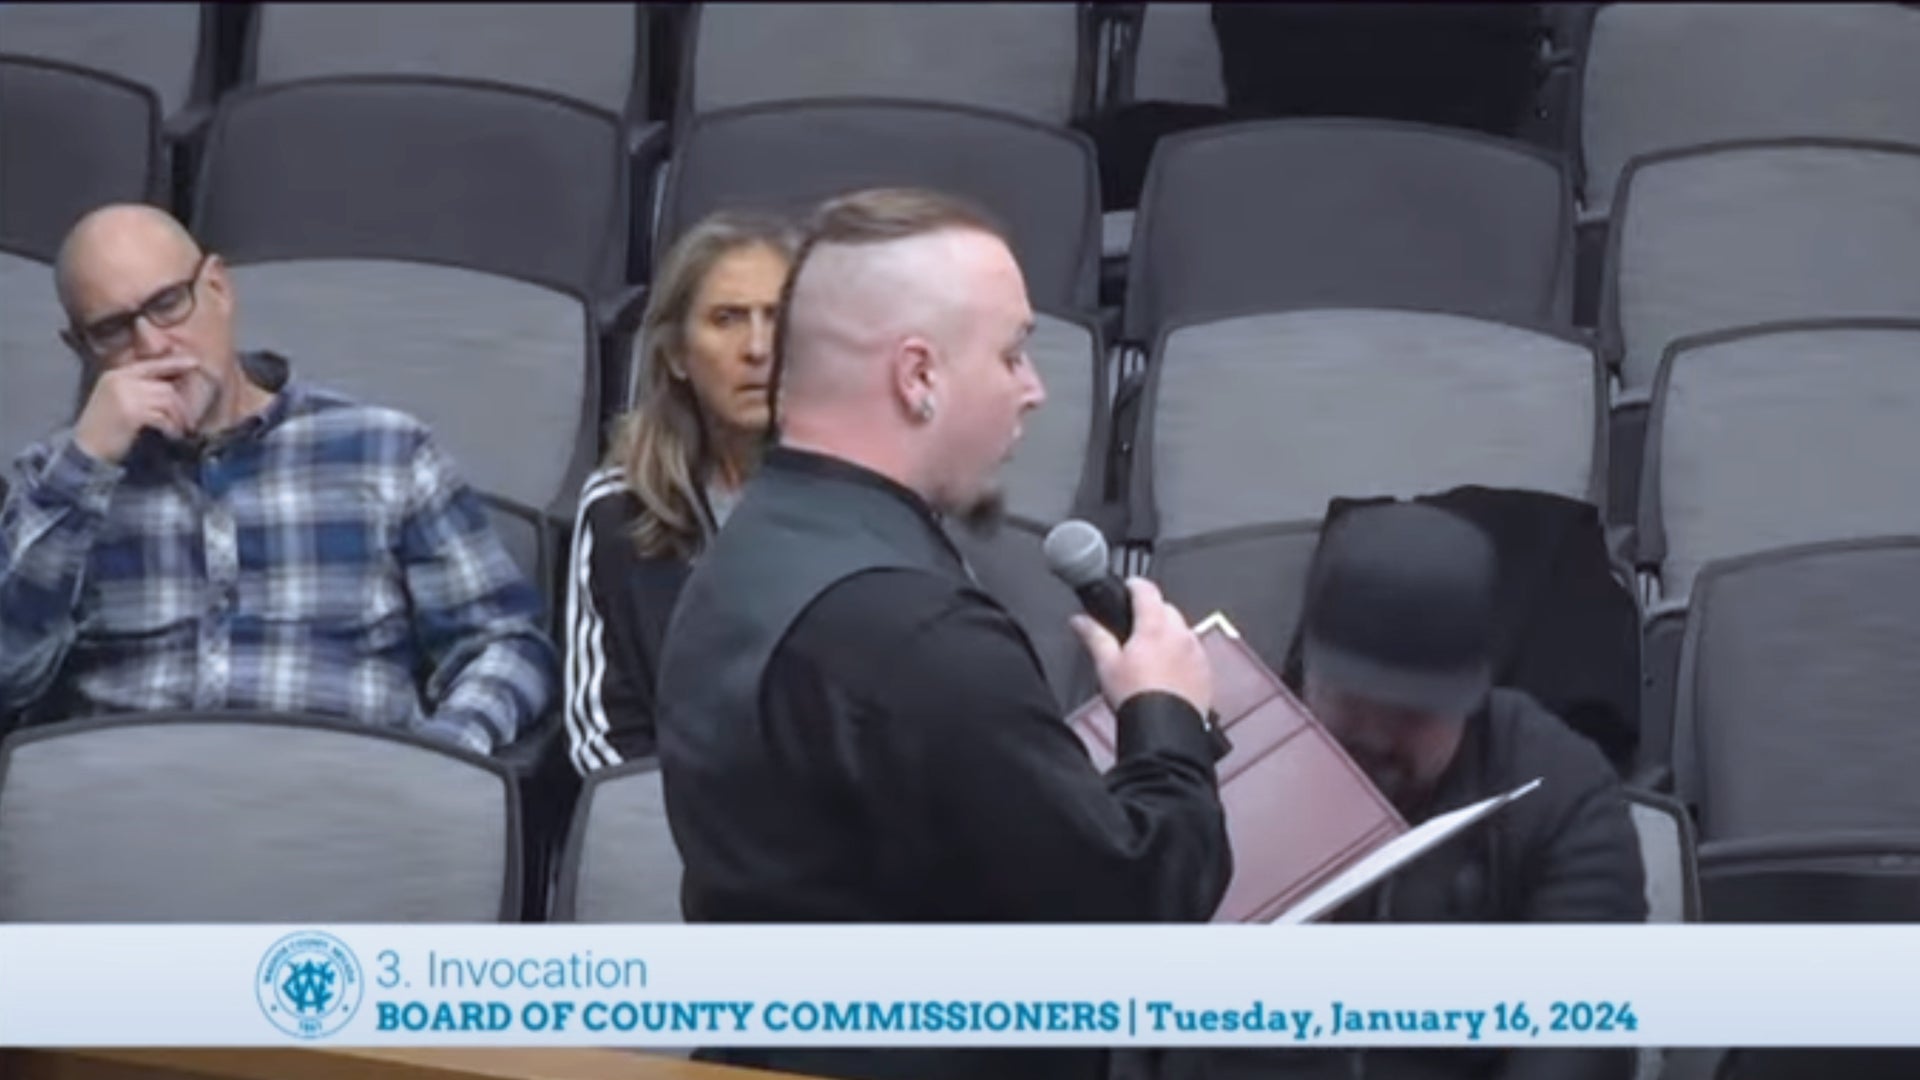 Satanist opens district meeting with an invocation cheering Satan: “A Battle Between Good and Evil.”